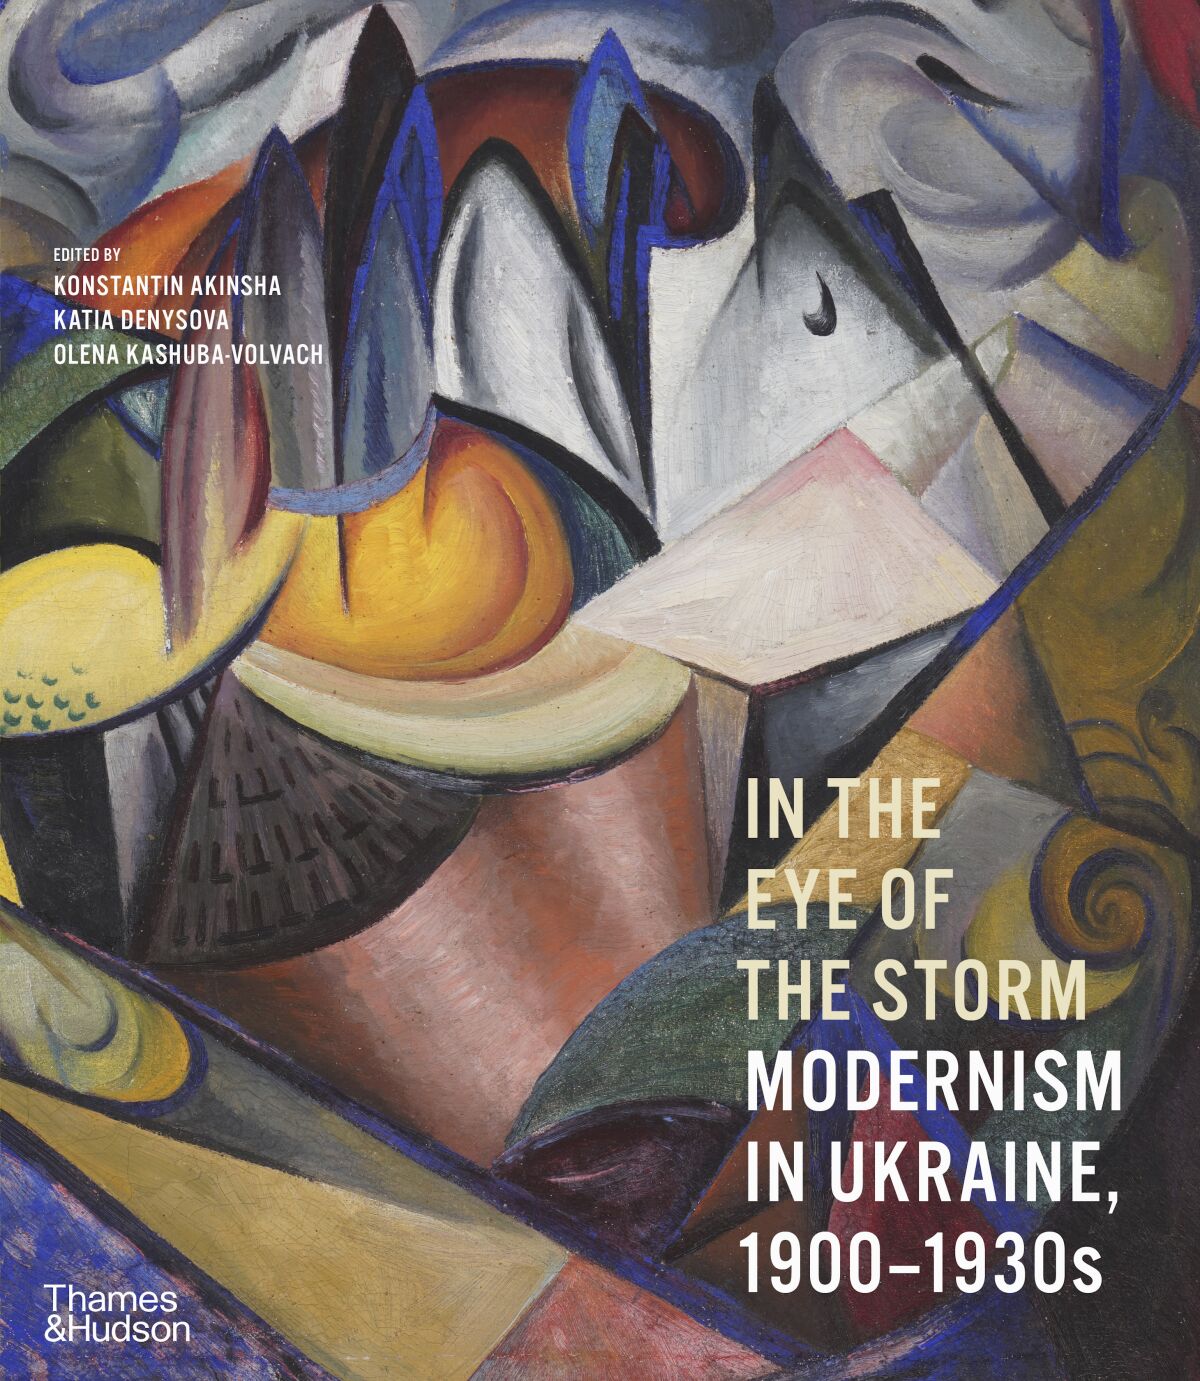 "In the Eyre of the Storm: Modernism in Ukraine, 1900 - 1930s" is published in conjunction with the Madrid show